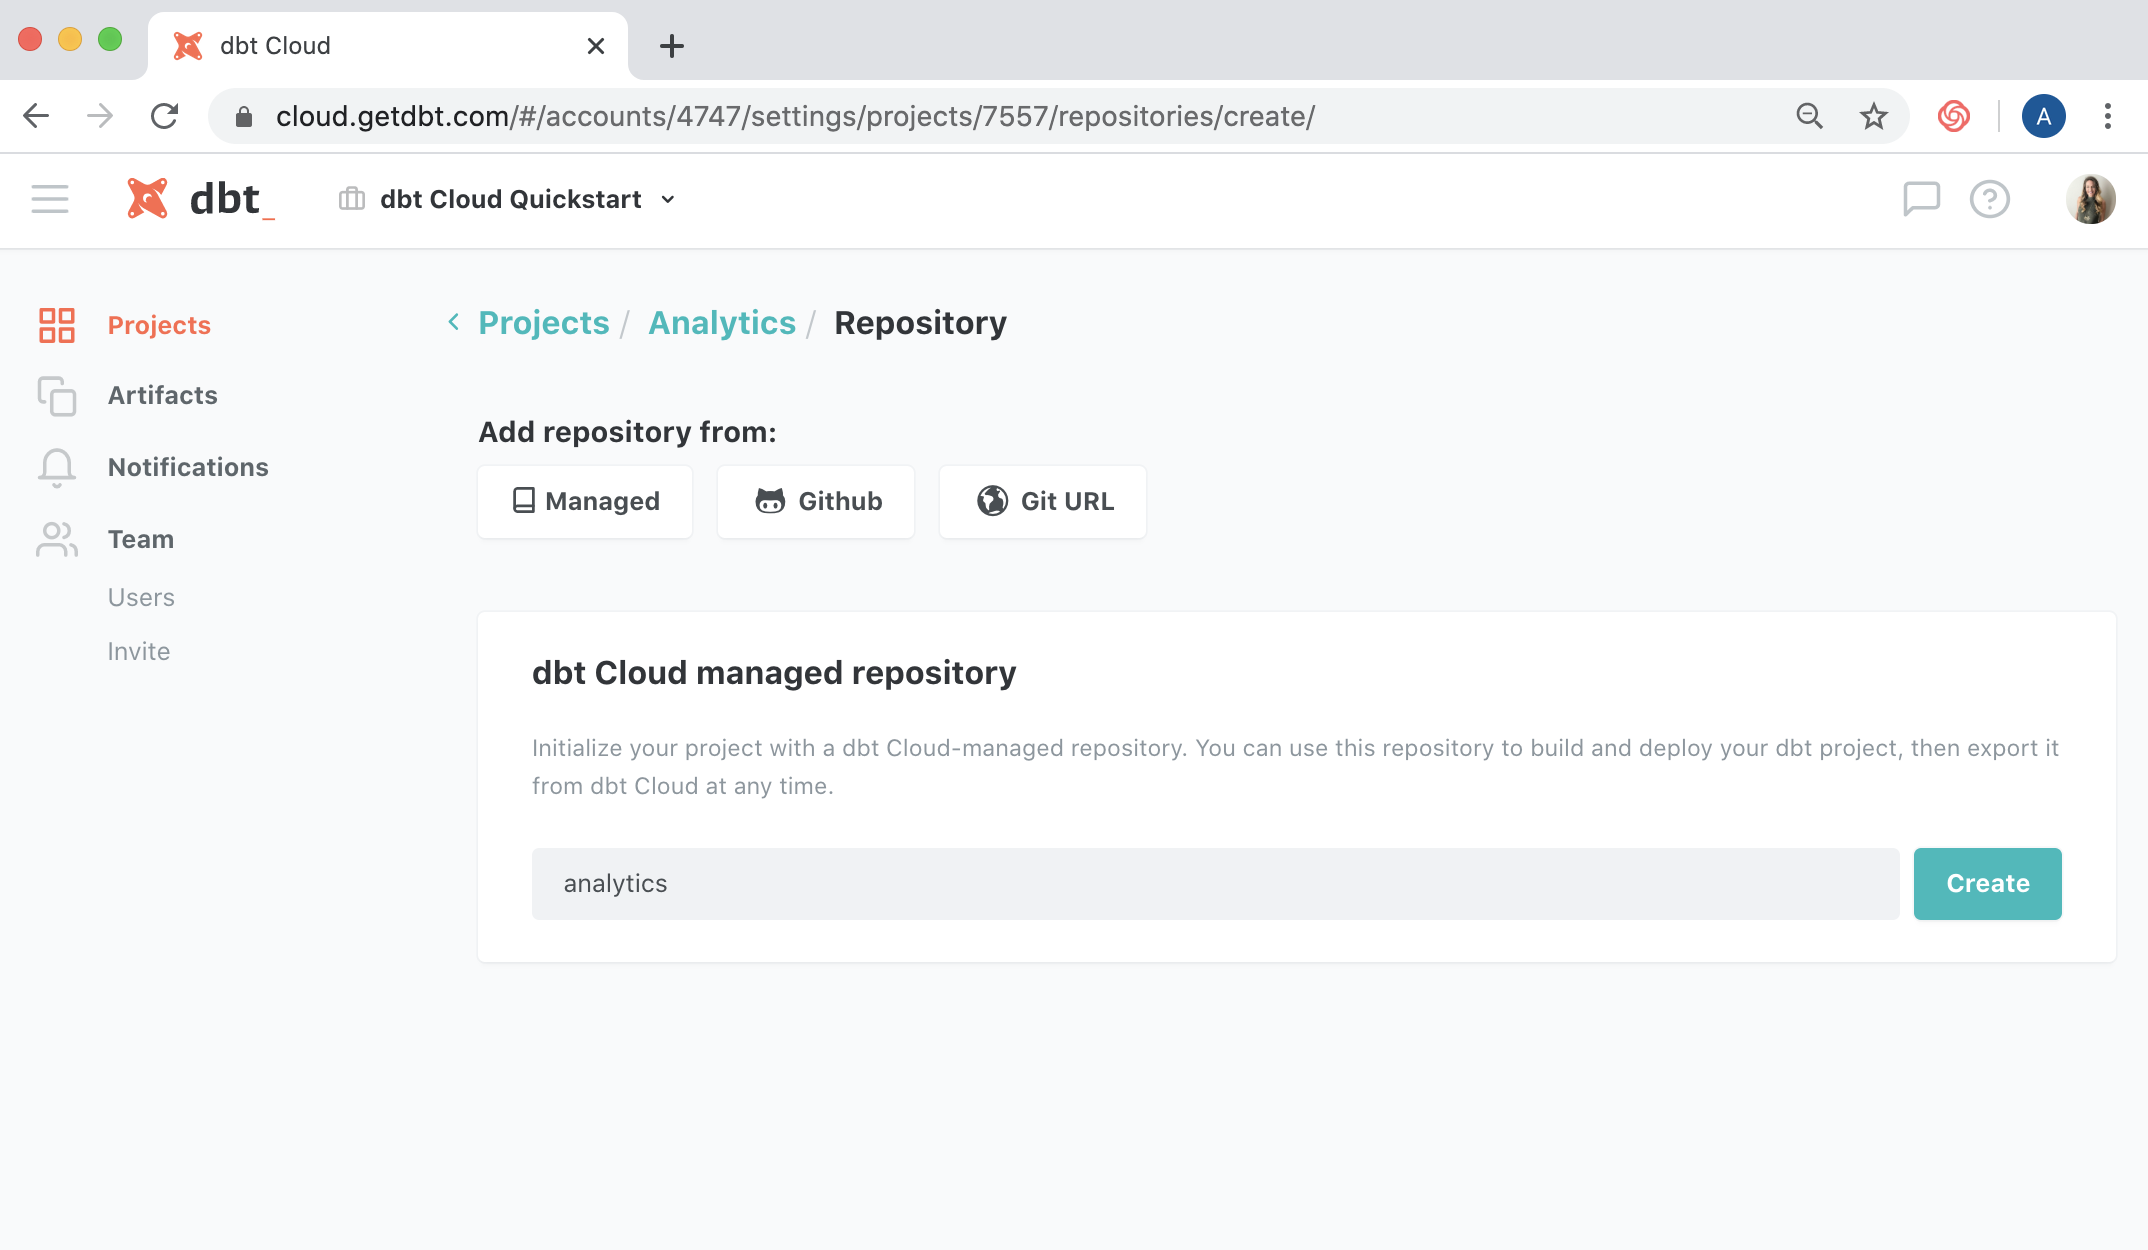 Adding a managed repository